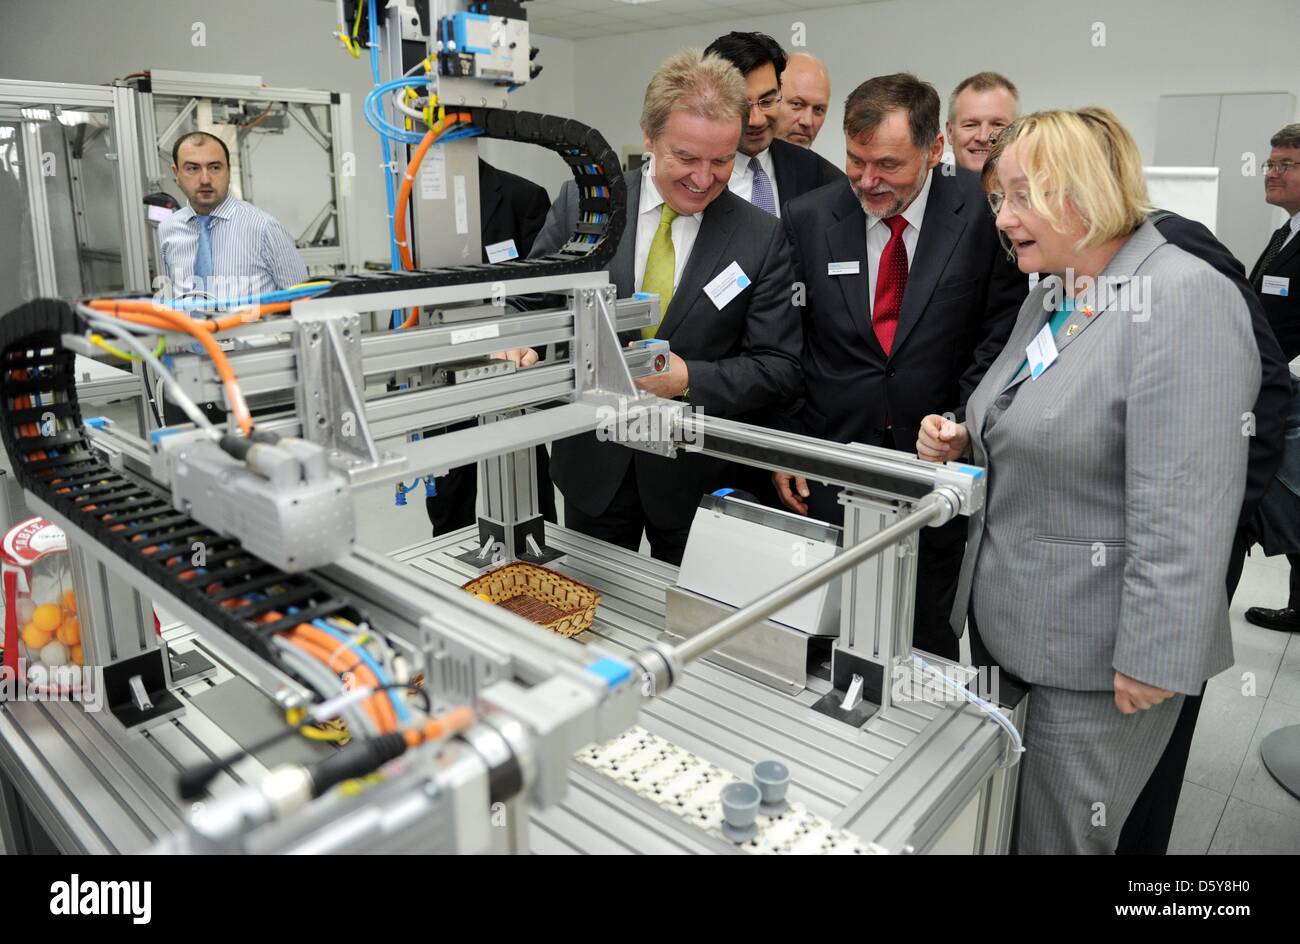 Baden-Wuerttemberg's Environment Minister Franz Untersteller (L), Baden-Wuerttemberg's Minister of Economy Theresia Bauer (R) and manager of the Festo Plant, Otto Bauer, observe a Festo machine at a factory of Festo in Instanbul, Turkey, 18 October 2012. The state government of Baden-Wuerttemberg is on a visit to Turkey with a large delegation. Photo: BERND WEISSBROD Stock Photo